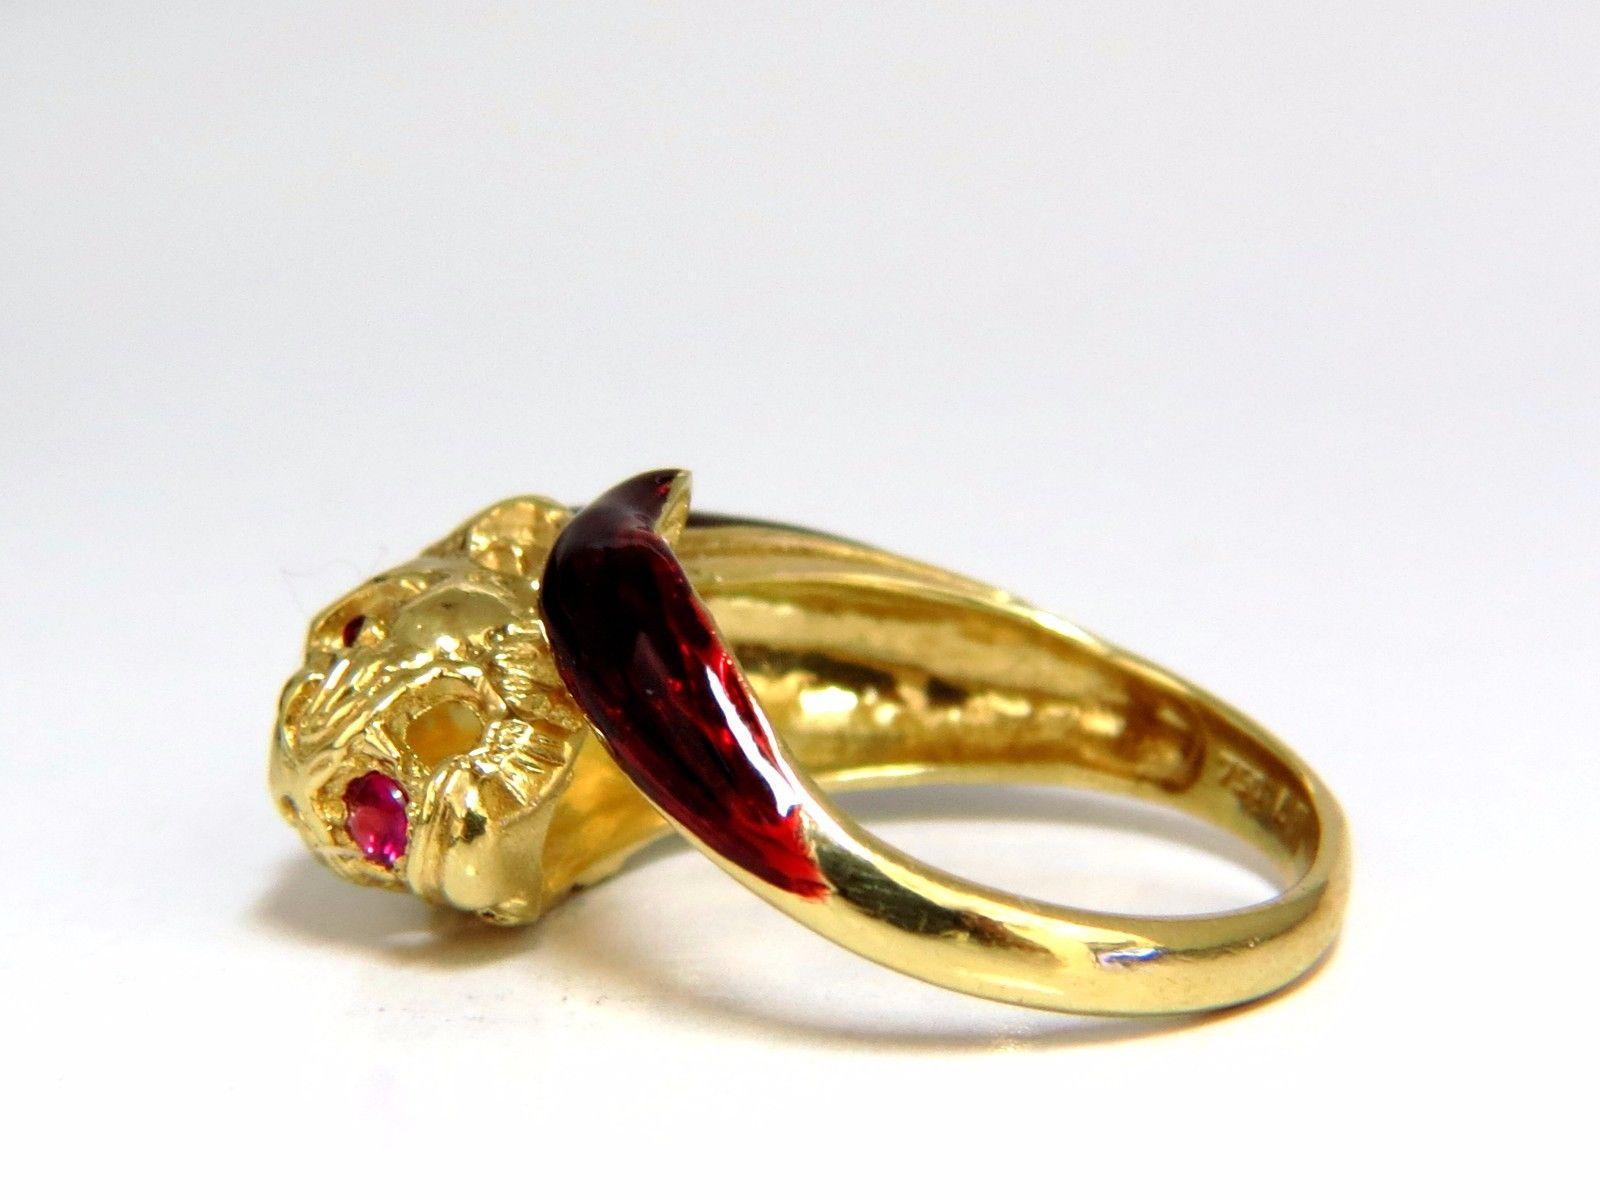 3D Gargoyle Gothic Vintage Endless Ring

Intricate enamel details.

.10ct of natural red Rubies.

  18kt. yellow gold

6.6 grams

Adjustable Ring Current size: 8-8.5

Ring is  12mm wide (ear to tail)

Depth: 8mm